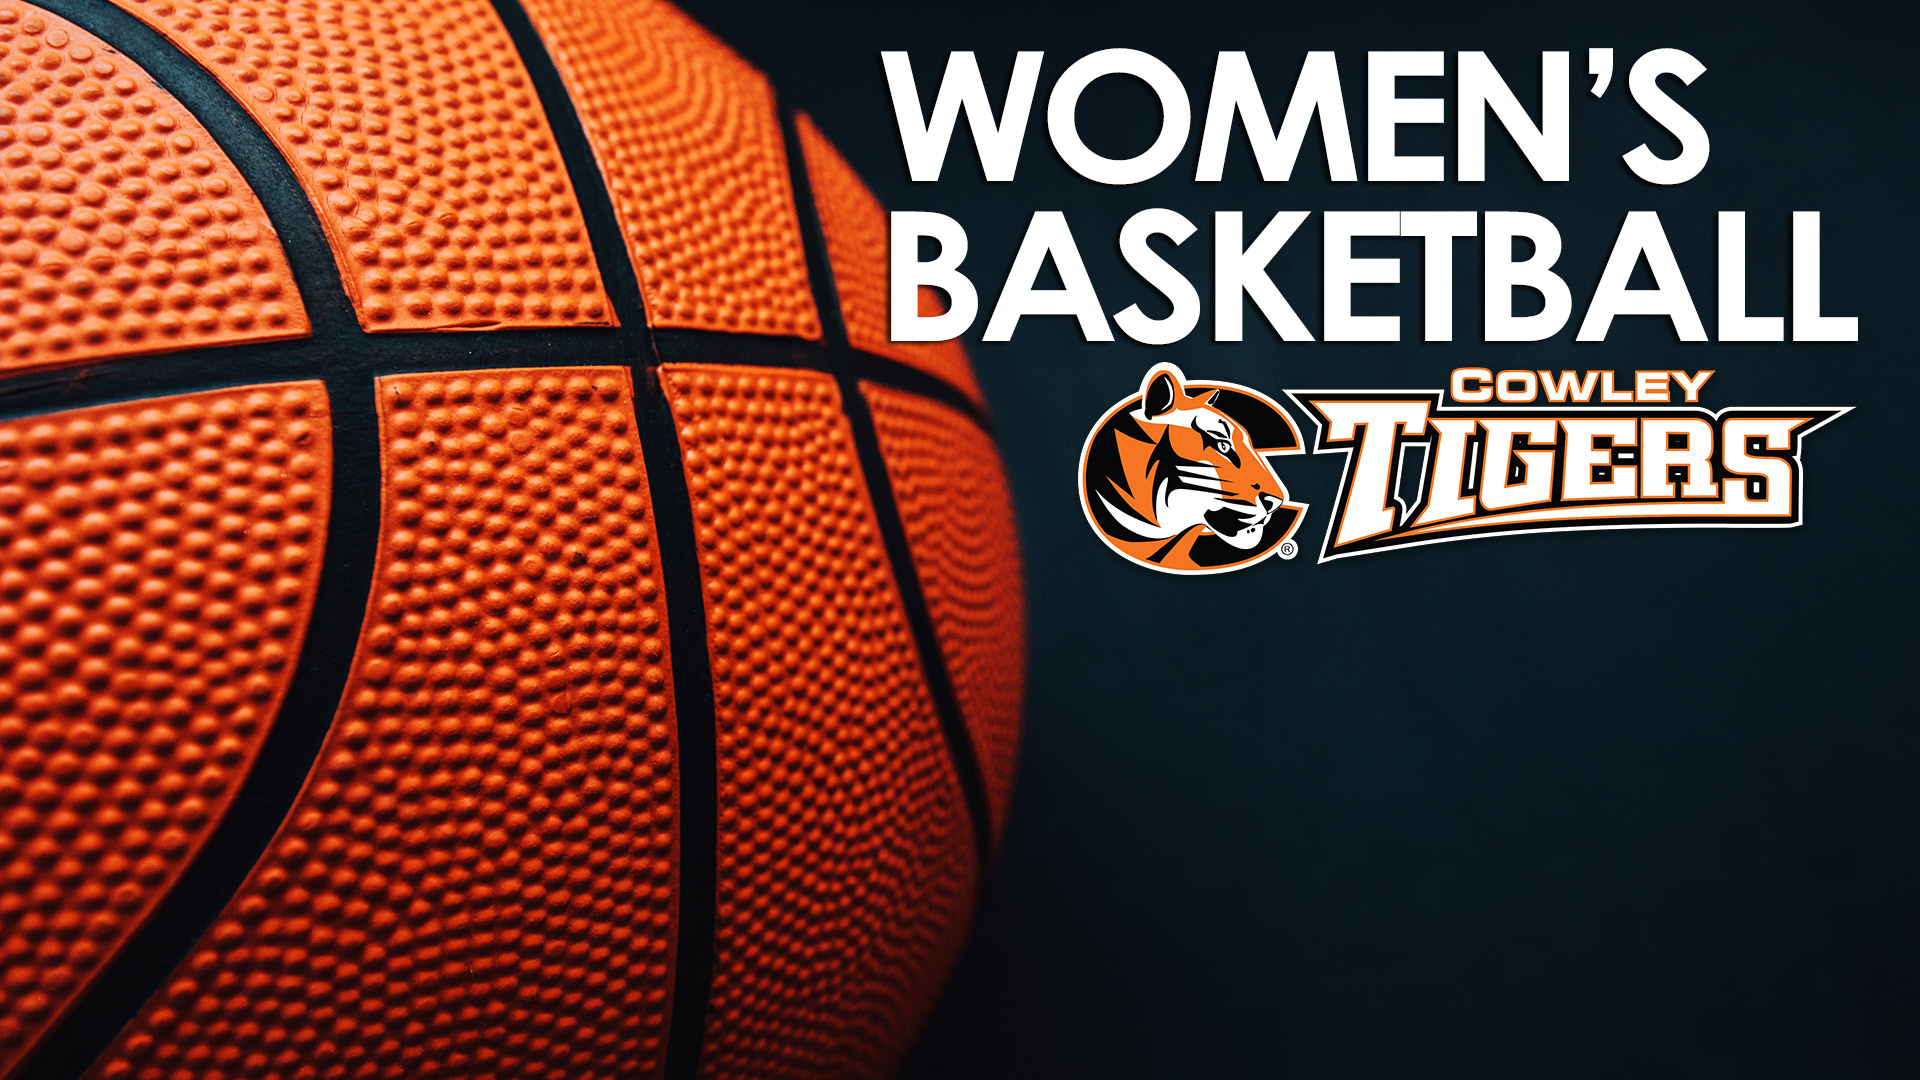 Lady Tigers grind out 61-55 win at Butler